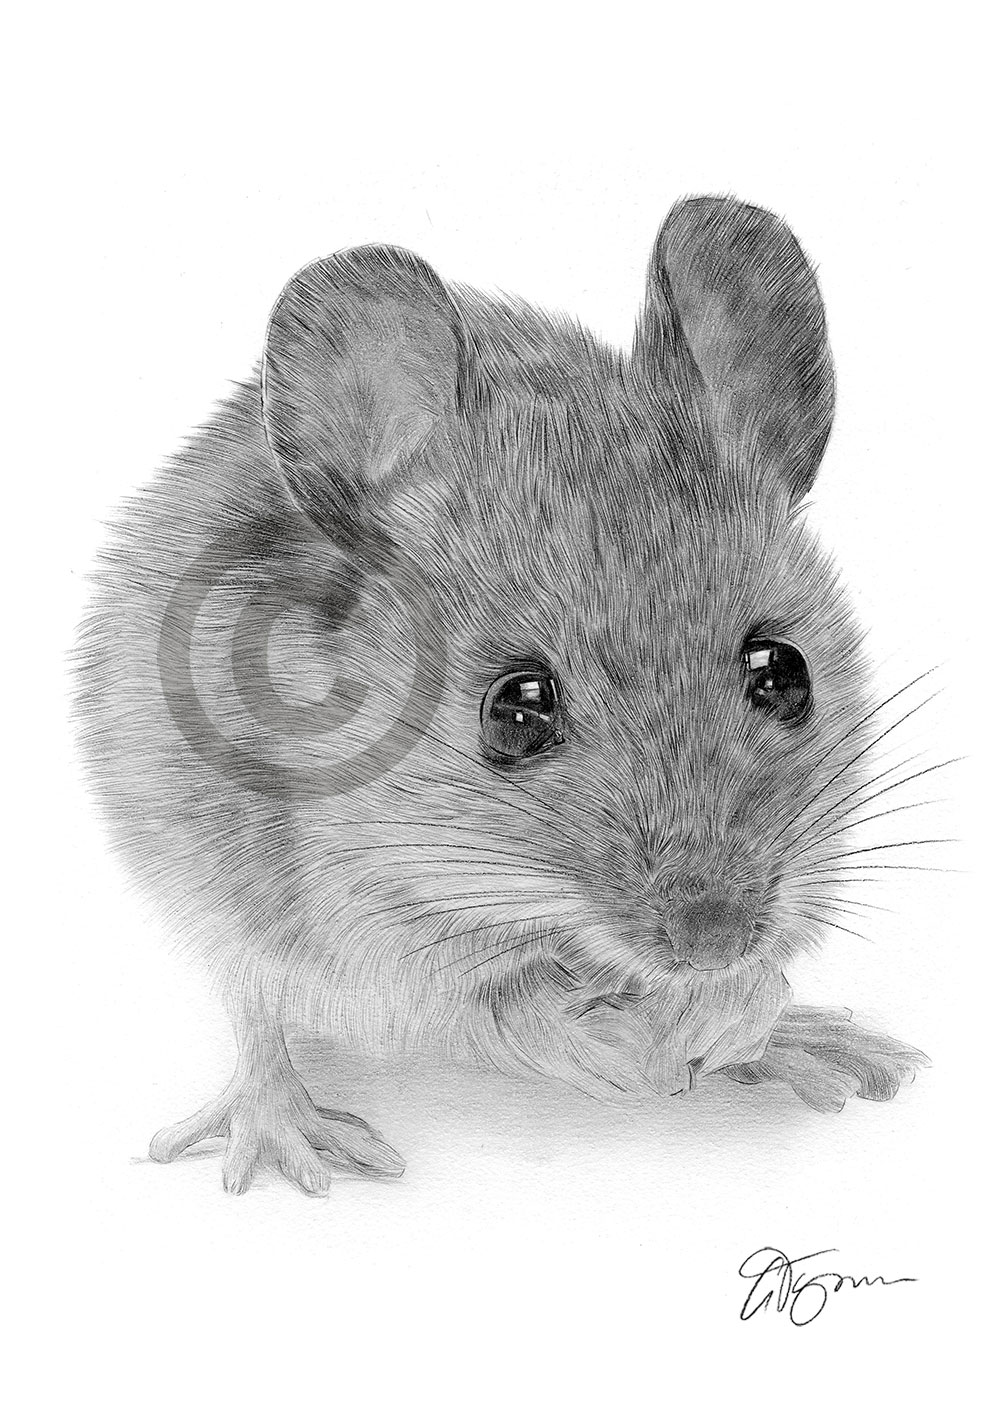 Pencil drawing of a mouse by artist Gary Tymon